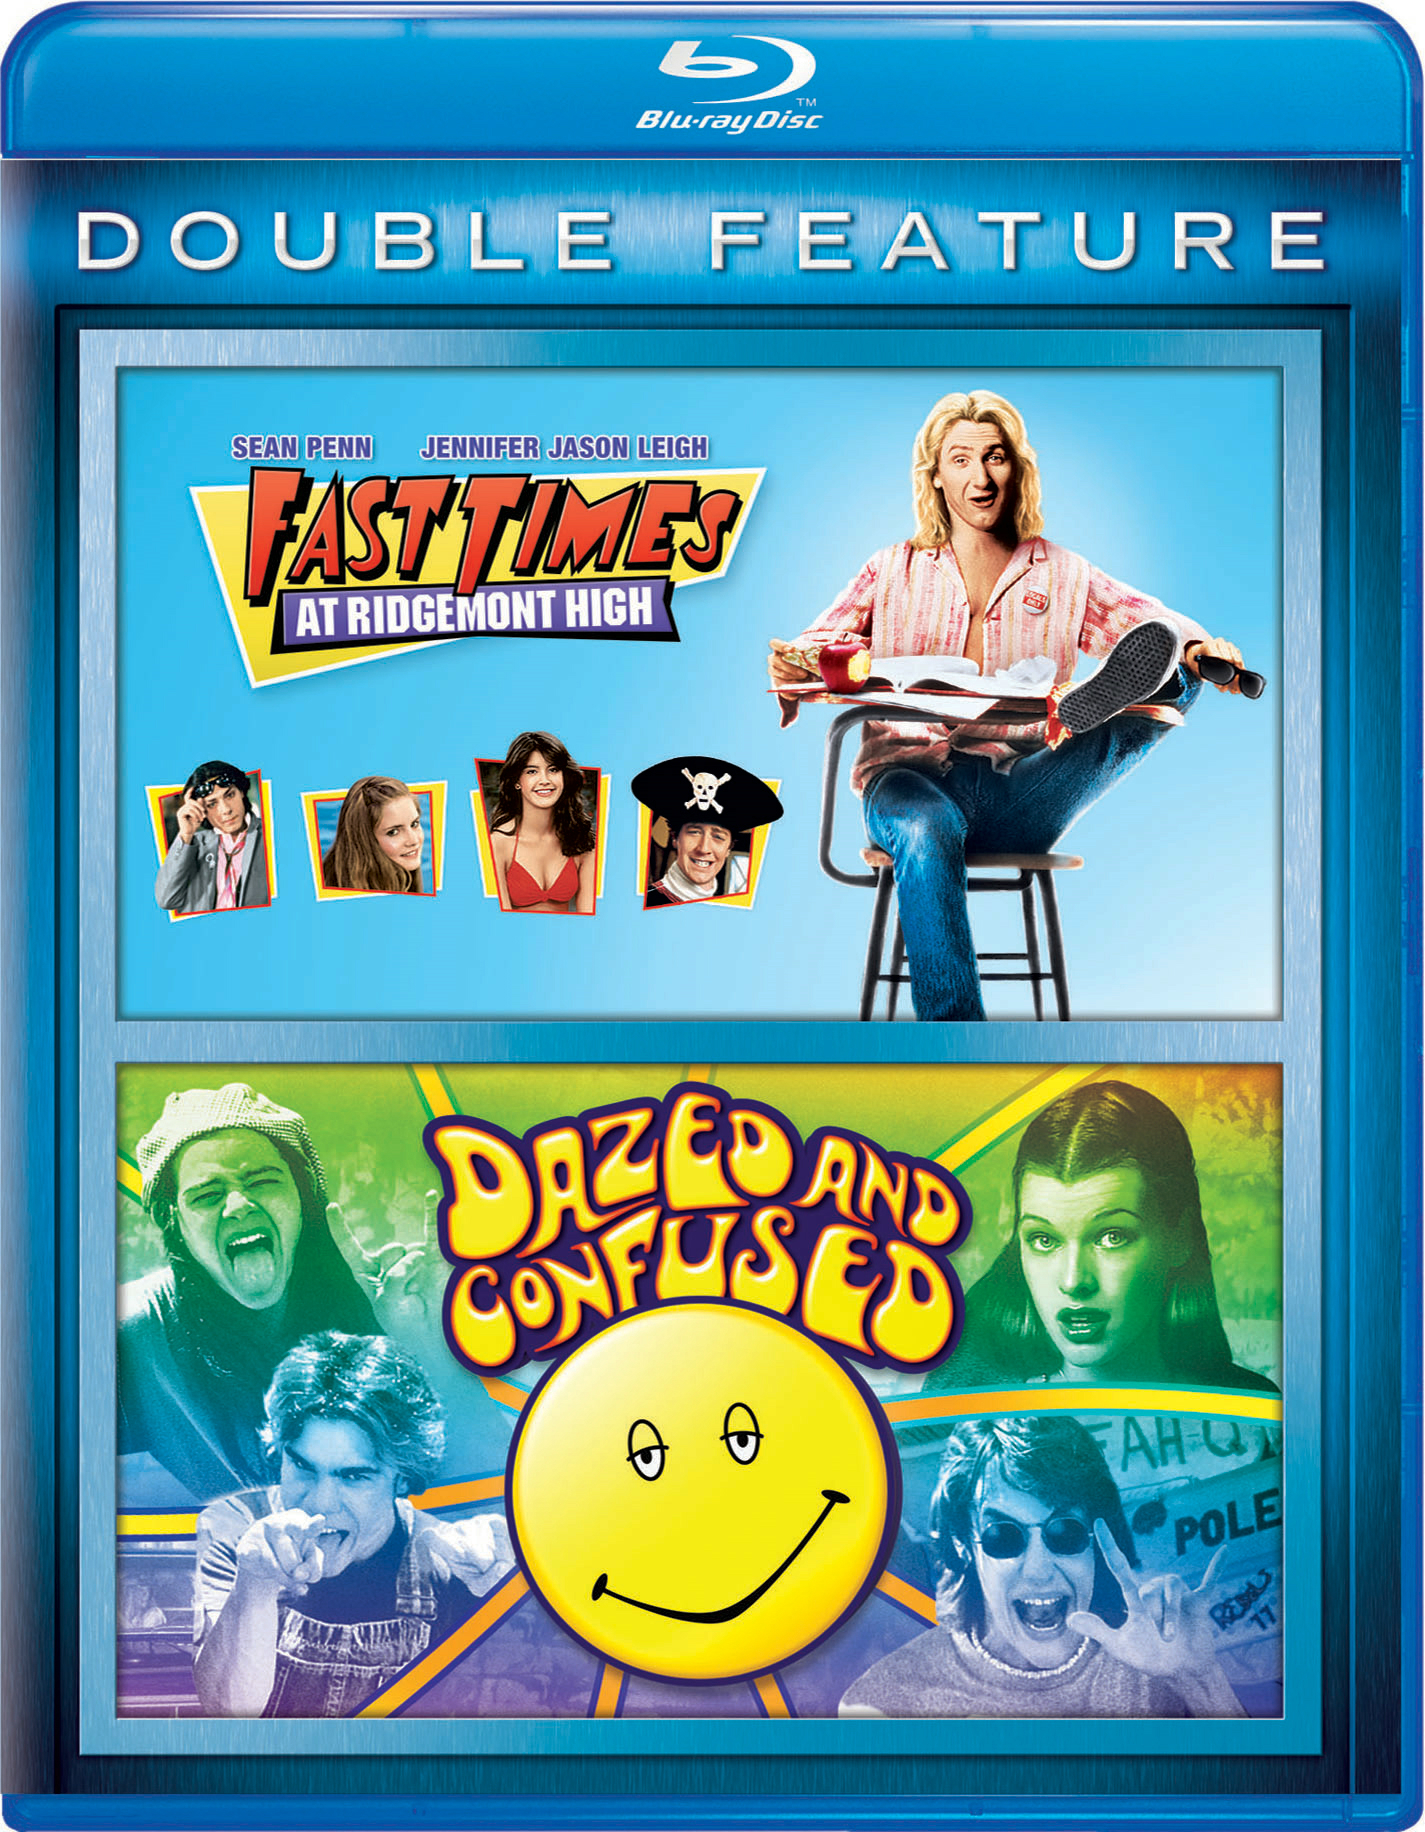 Fast Times At Ridgemont High/Dazed And Confused (Blu-ray Double Feature) - Blu-ray   - Comedy Movies On Blu-ray - Movies On GRUV